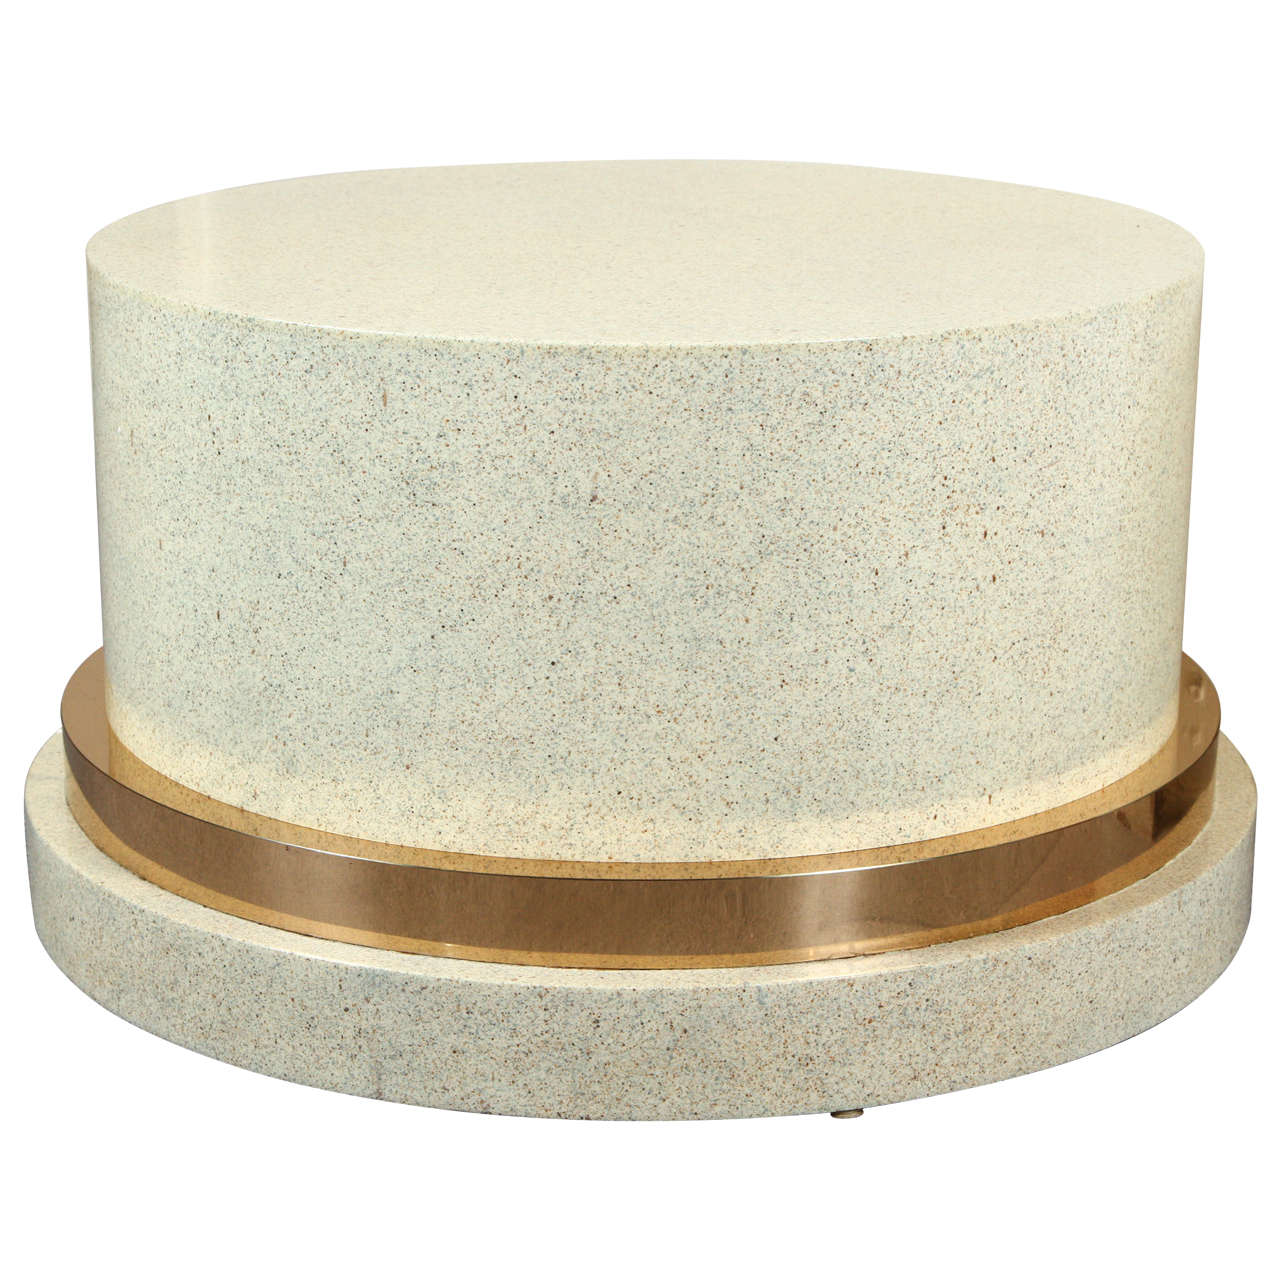 Low Pedestal, or Coffee Table Base of Wood and Brass with a Faux Stone Finish For Sale